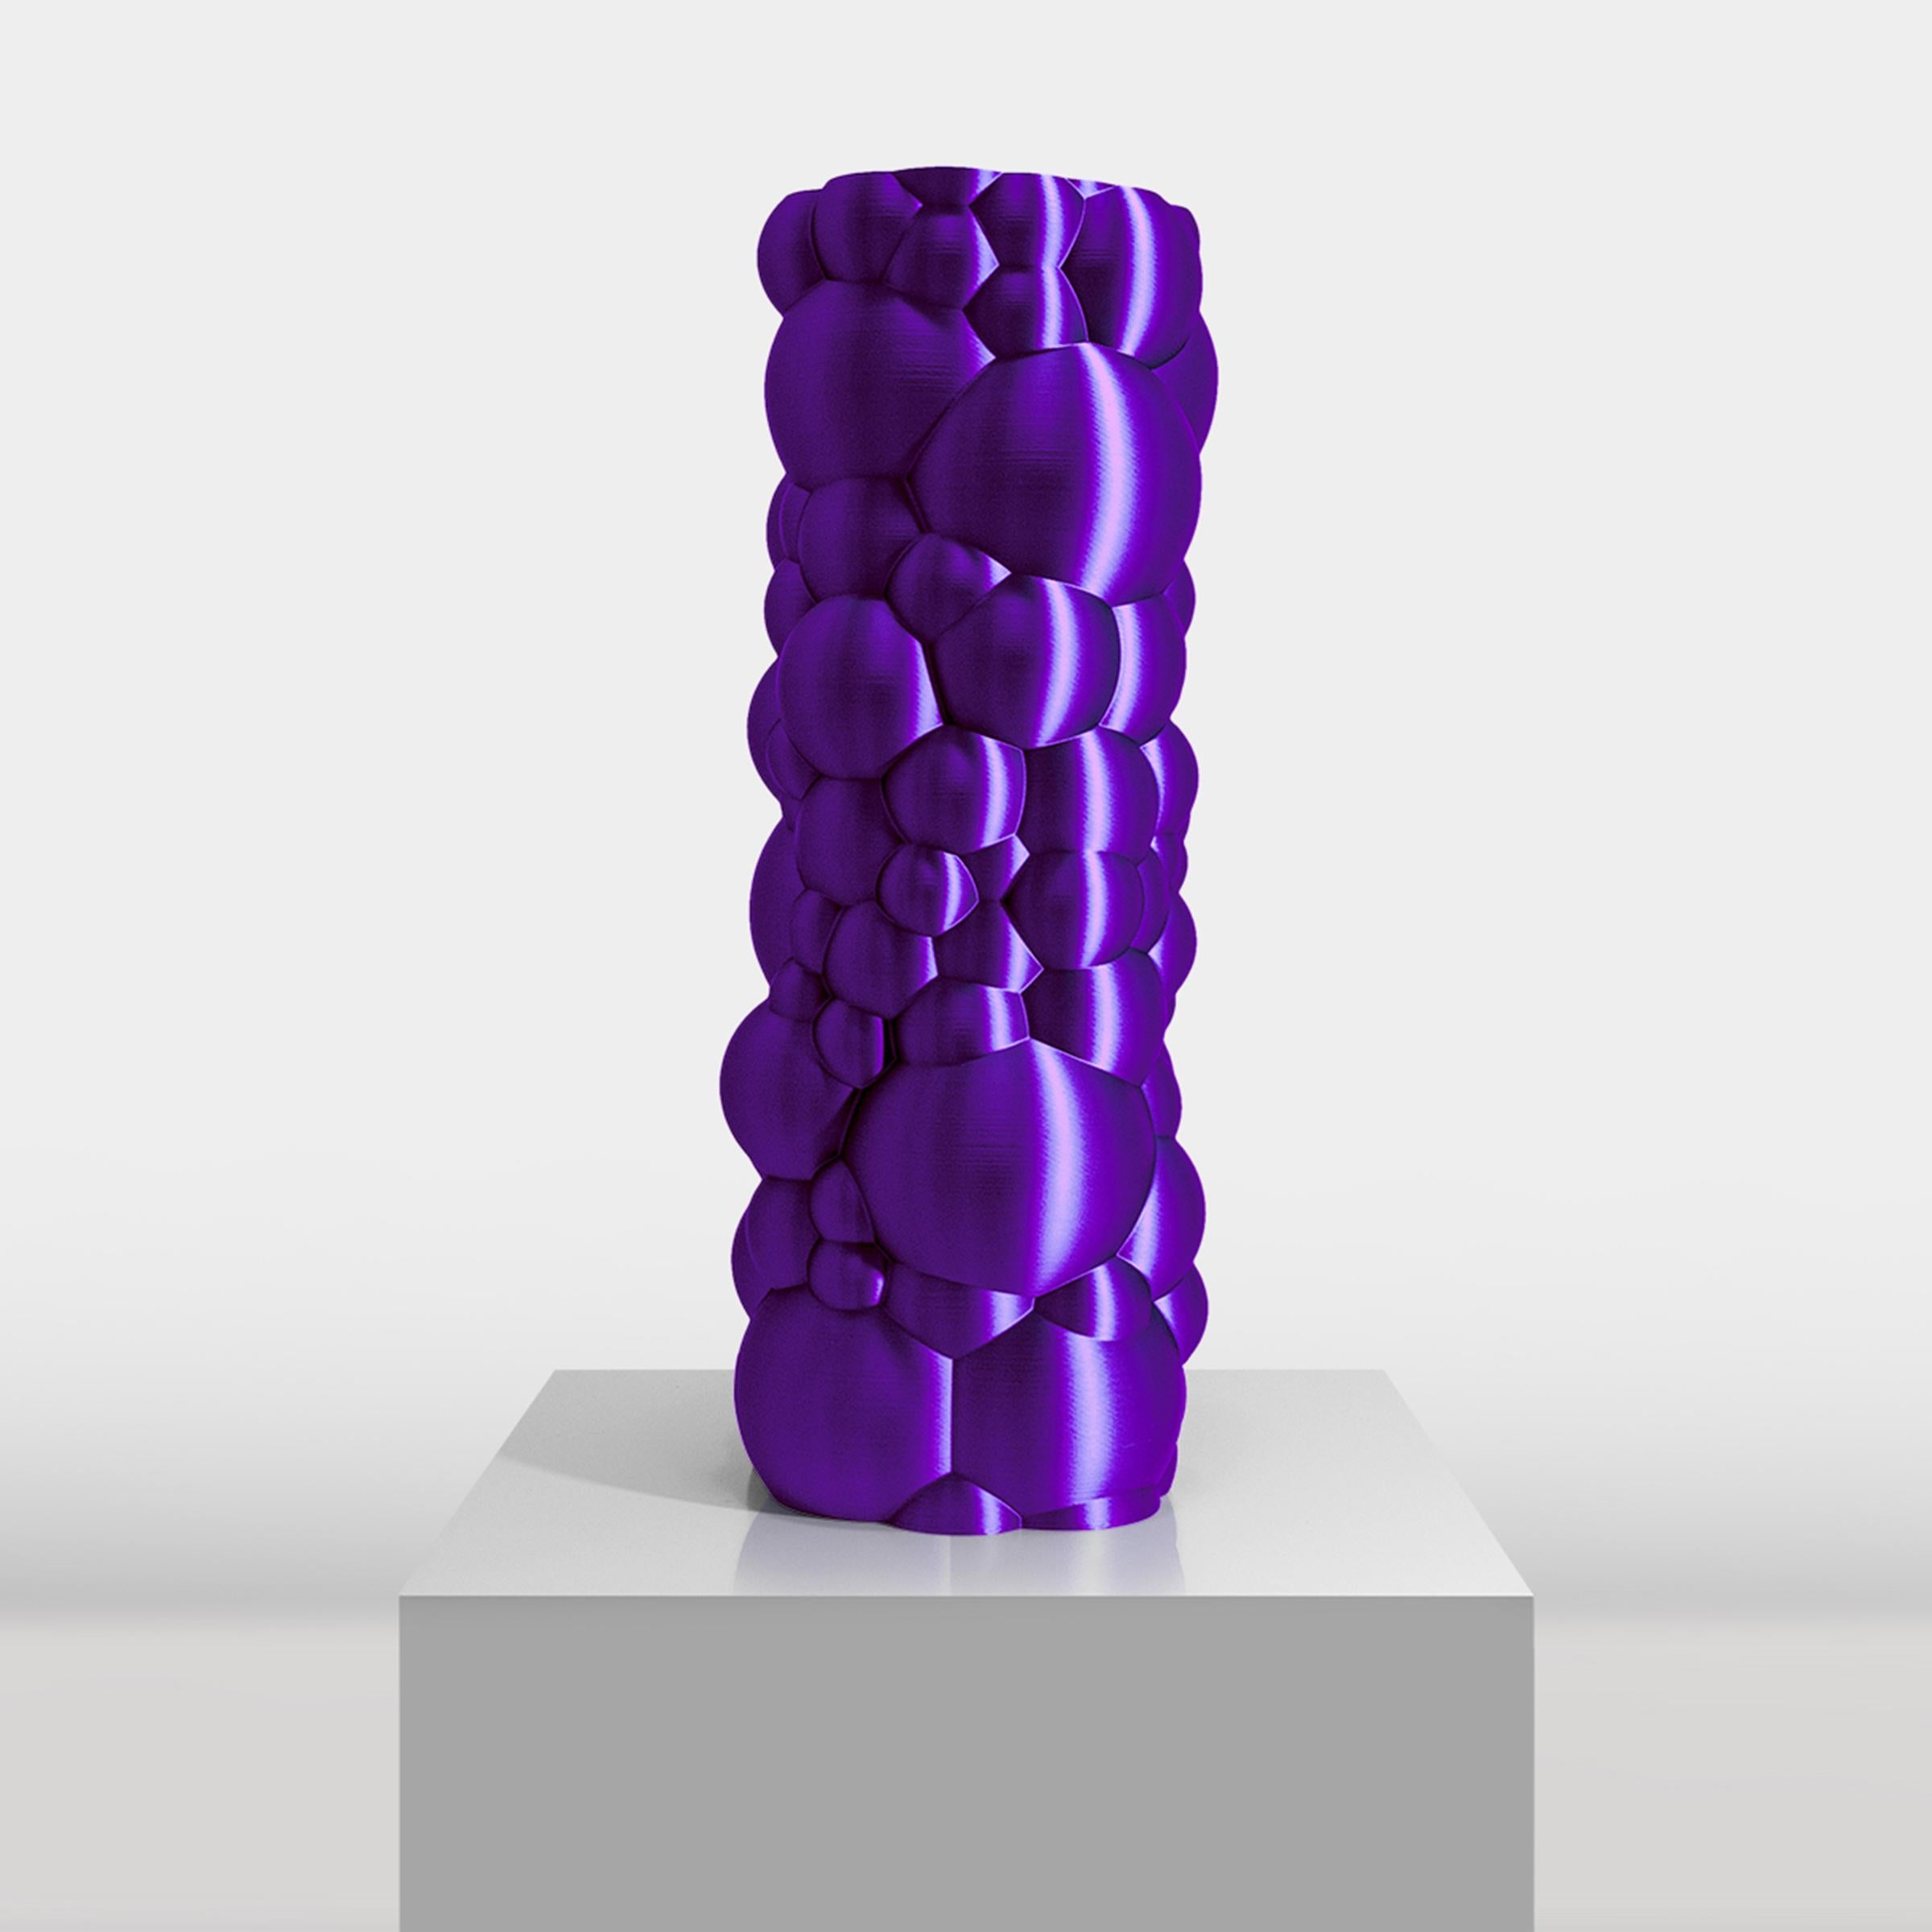 Vase-sculpture by DygoDesign

Defined by a stupendous purple shade enhanced with a mesmerizing and brilliant metallic effect, this sculpture is a one-of-a-kind design that will perfectly suit a contemporary interior. It features an irregular,